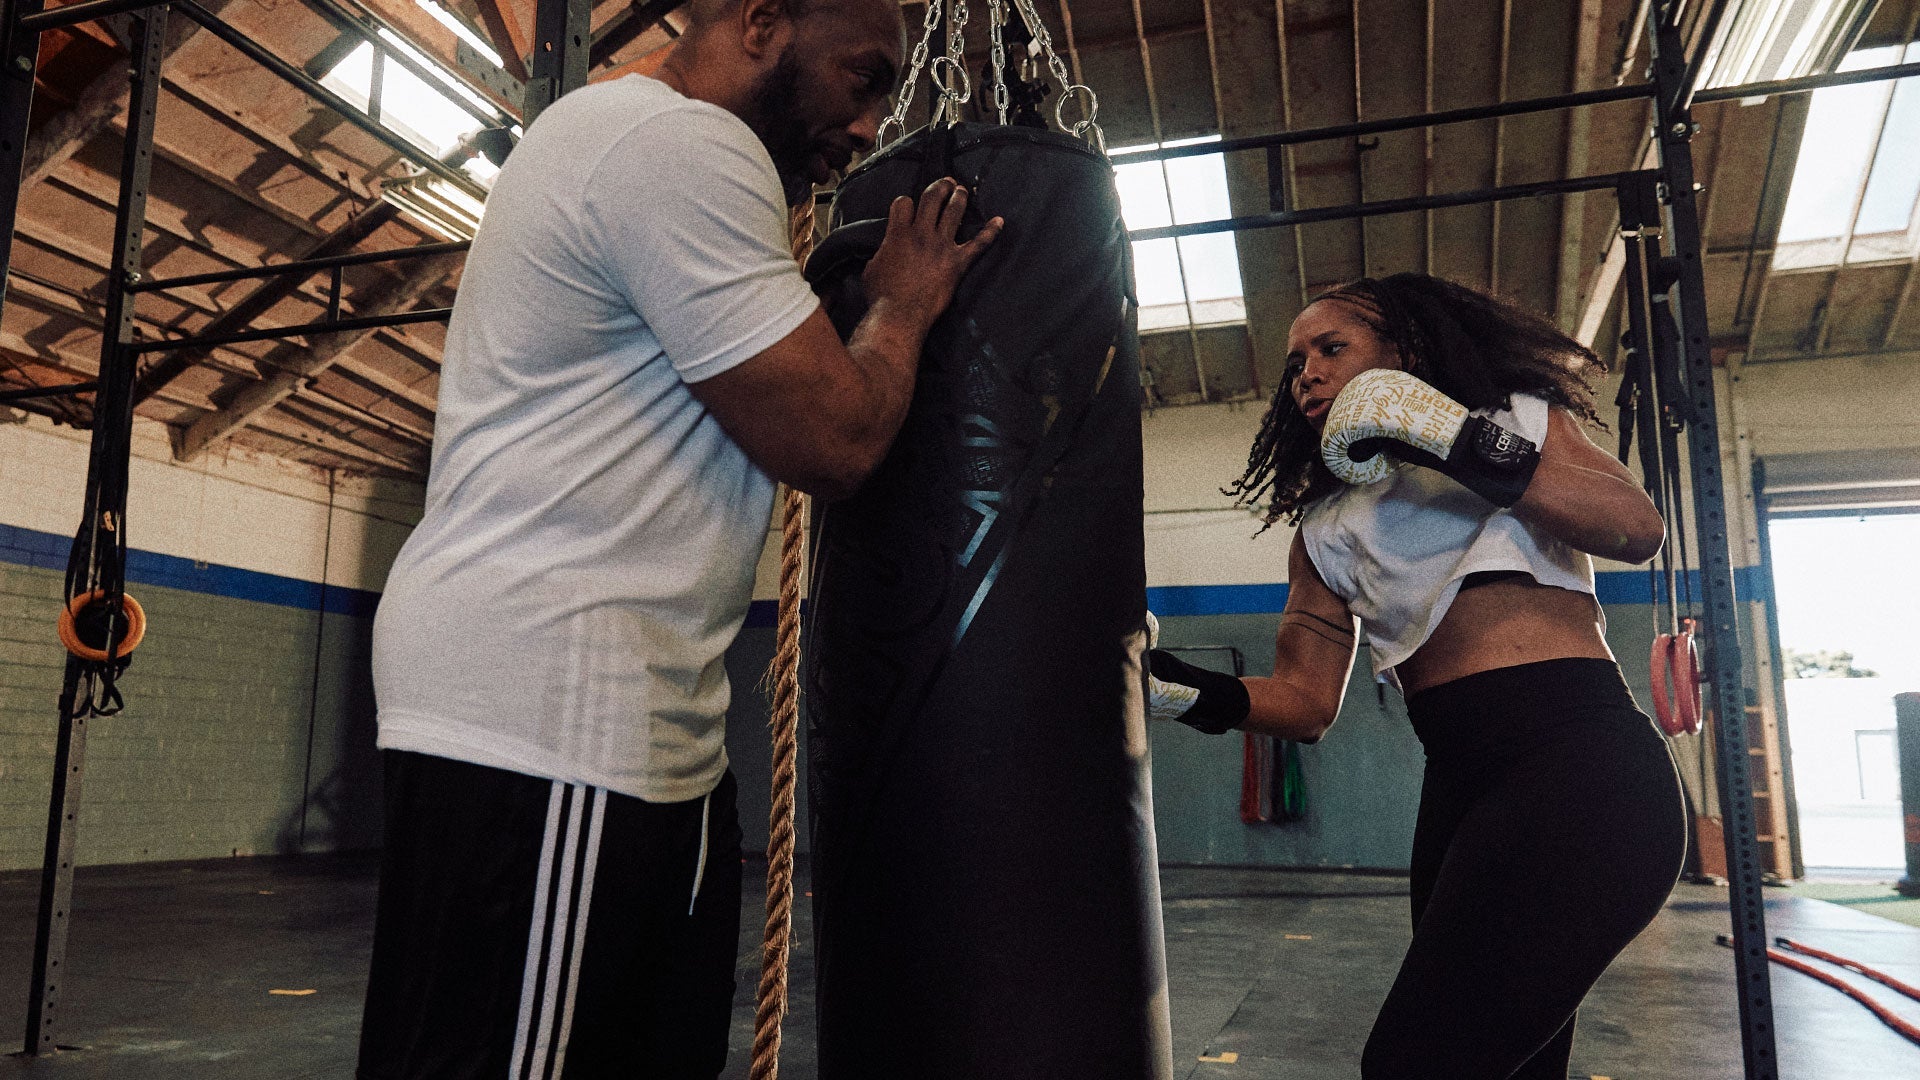 Woman punching bag a man is holding